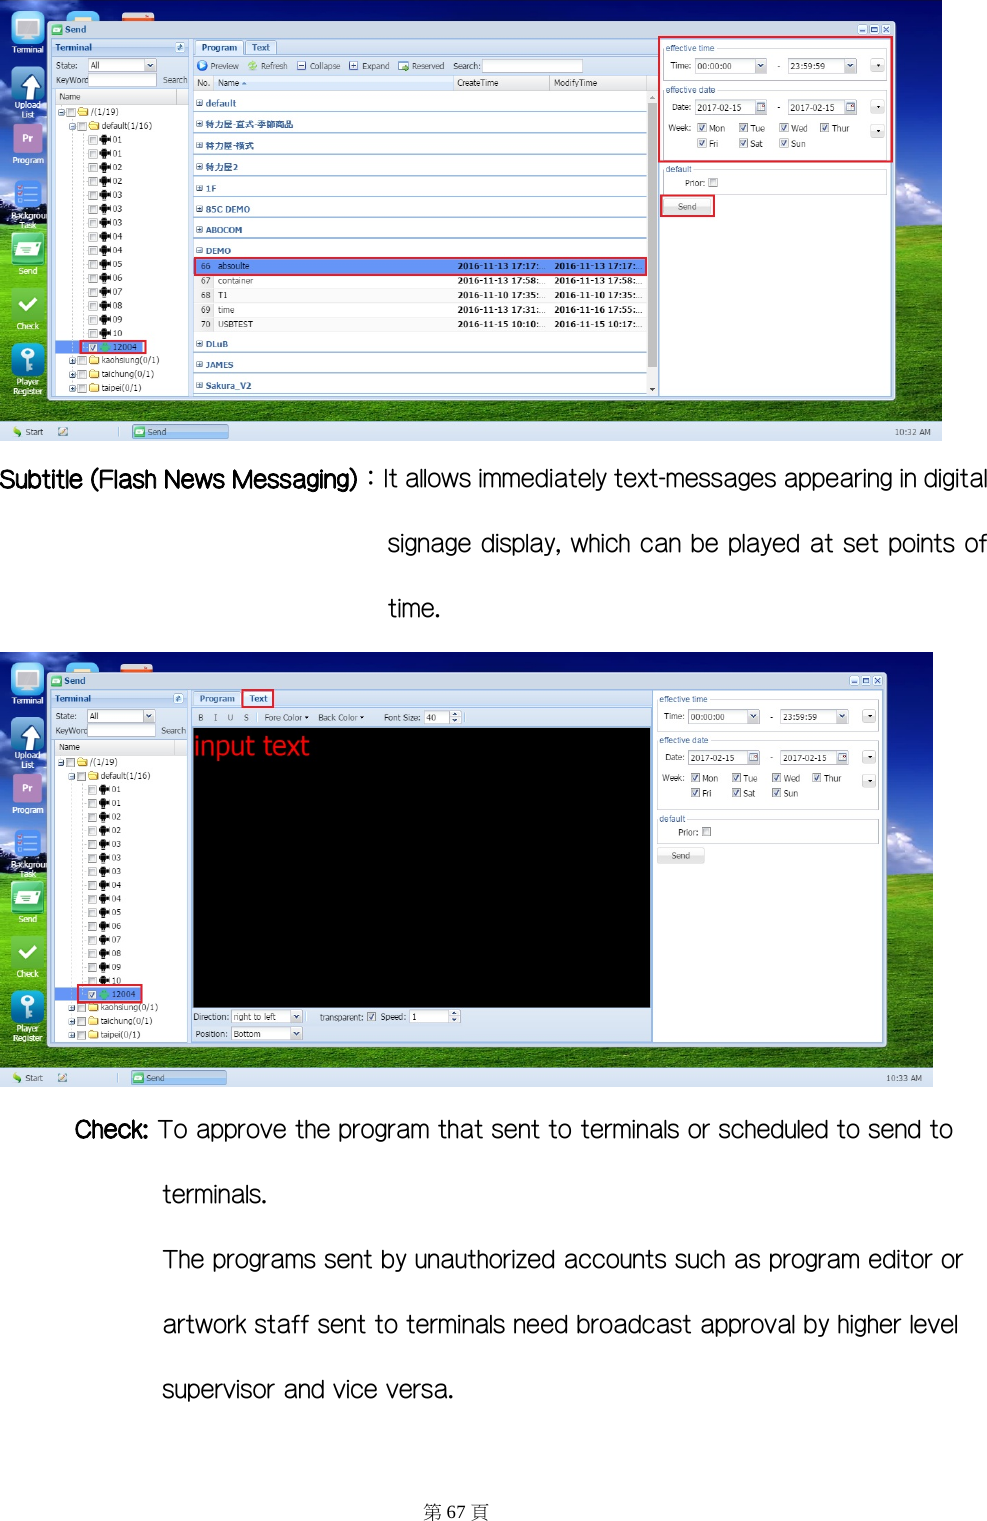  Subtitle (Flash News Messaging)：It allows immediately text-messages appearing in digital signage display, which can be played at set points of time.  Check: To approve the program that sent to terminals or scheduled to send to terminals. The programs sent by unauthorized accounts such as program editor or artwork staff sent to terminals need broadcast approval by higher level supervisor and vice versa. 第67 頁 